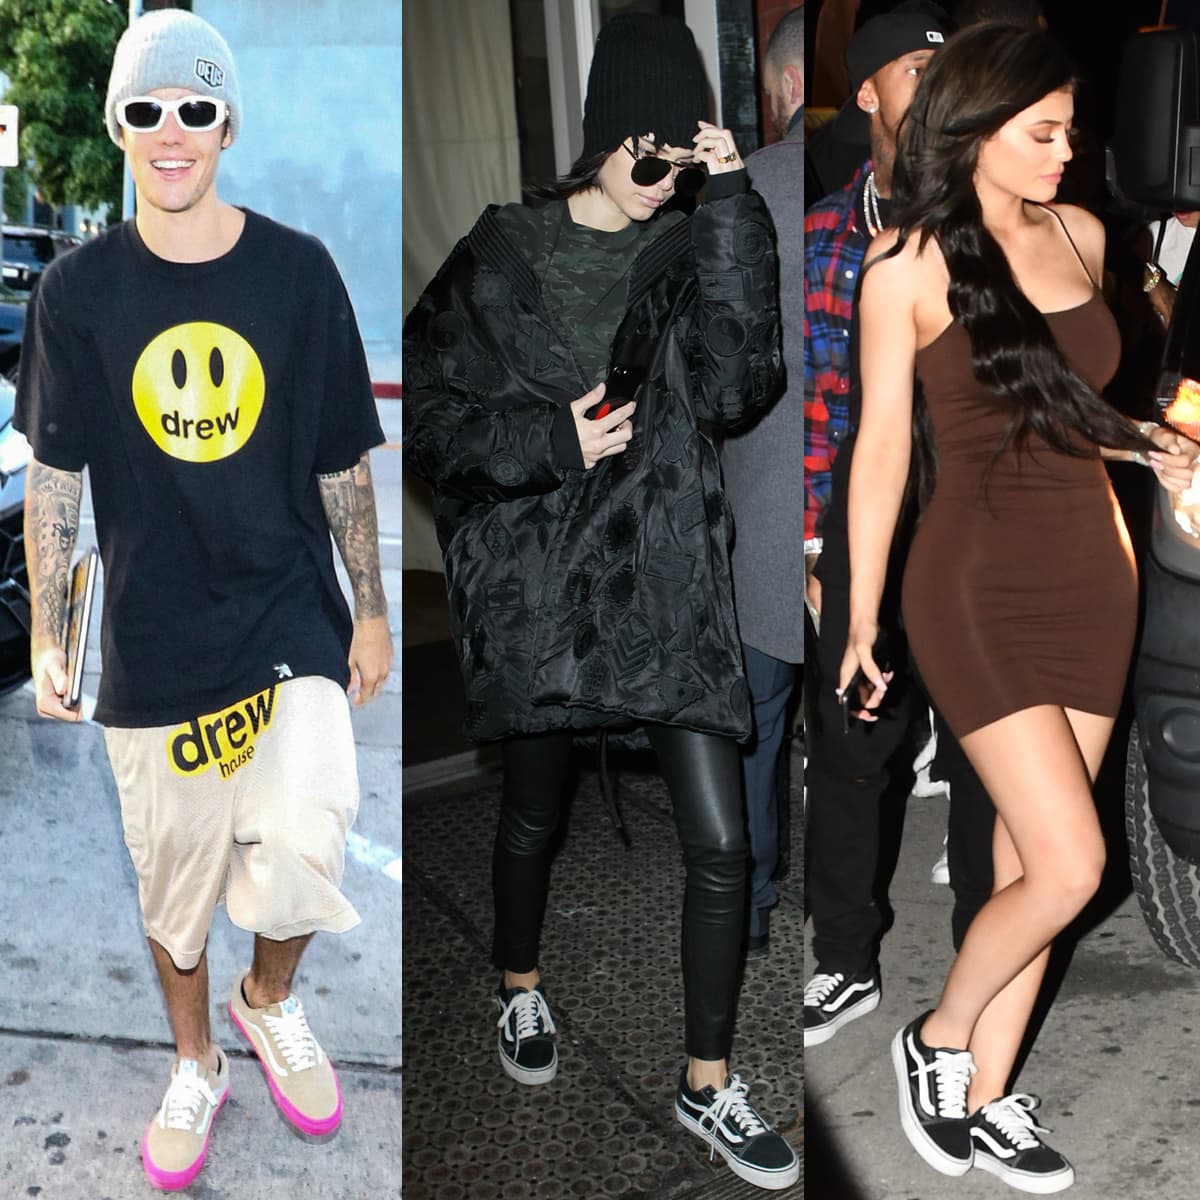 Justin Bieber, Kendall Jenner, and Kylie Jenner are just some of the many celebrities who wear the Vans Old Skool shoes